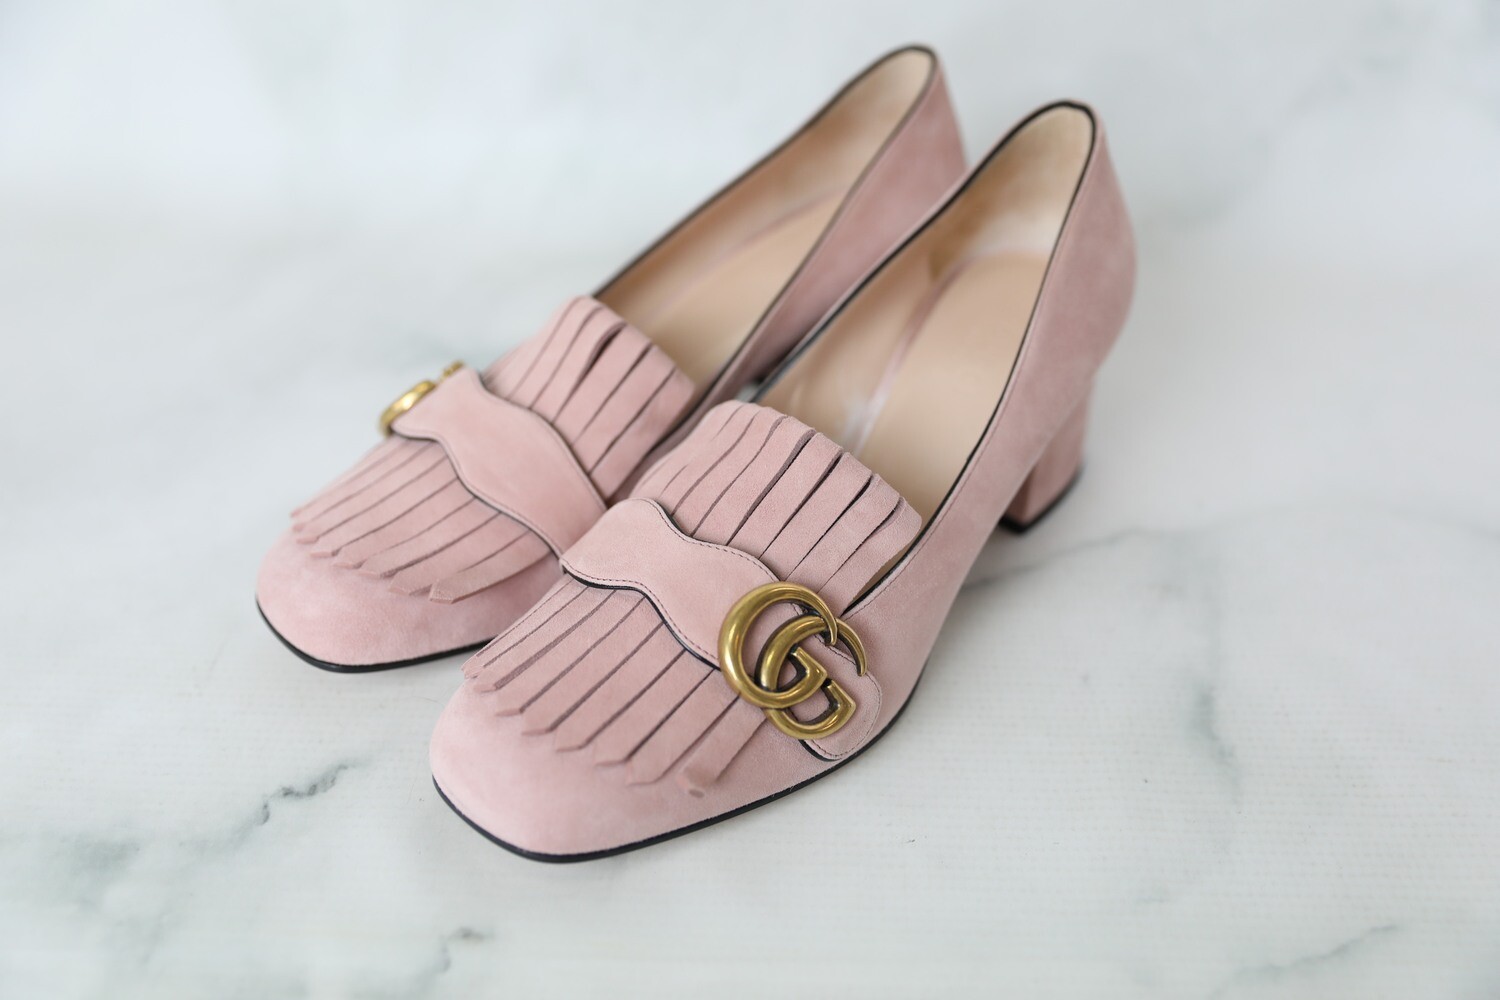 stribe patient Ideelt Gucci Shoes Marmont Loafer Pumps, Pink Suede, Size 38.5, New in Box WA001 -  Julia Rose Boston | Shop